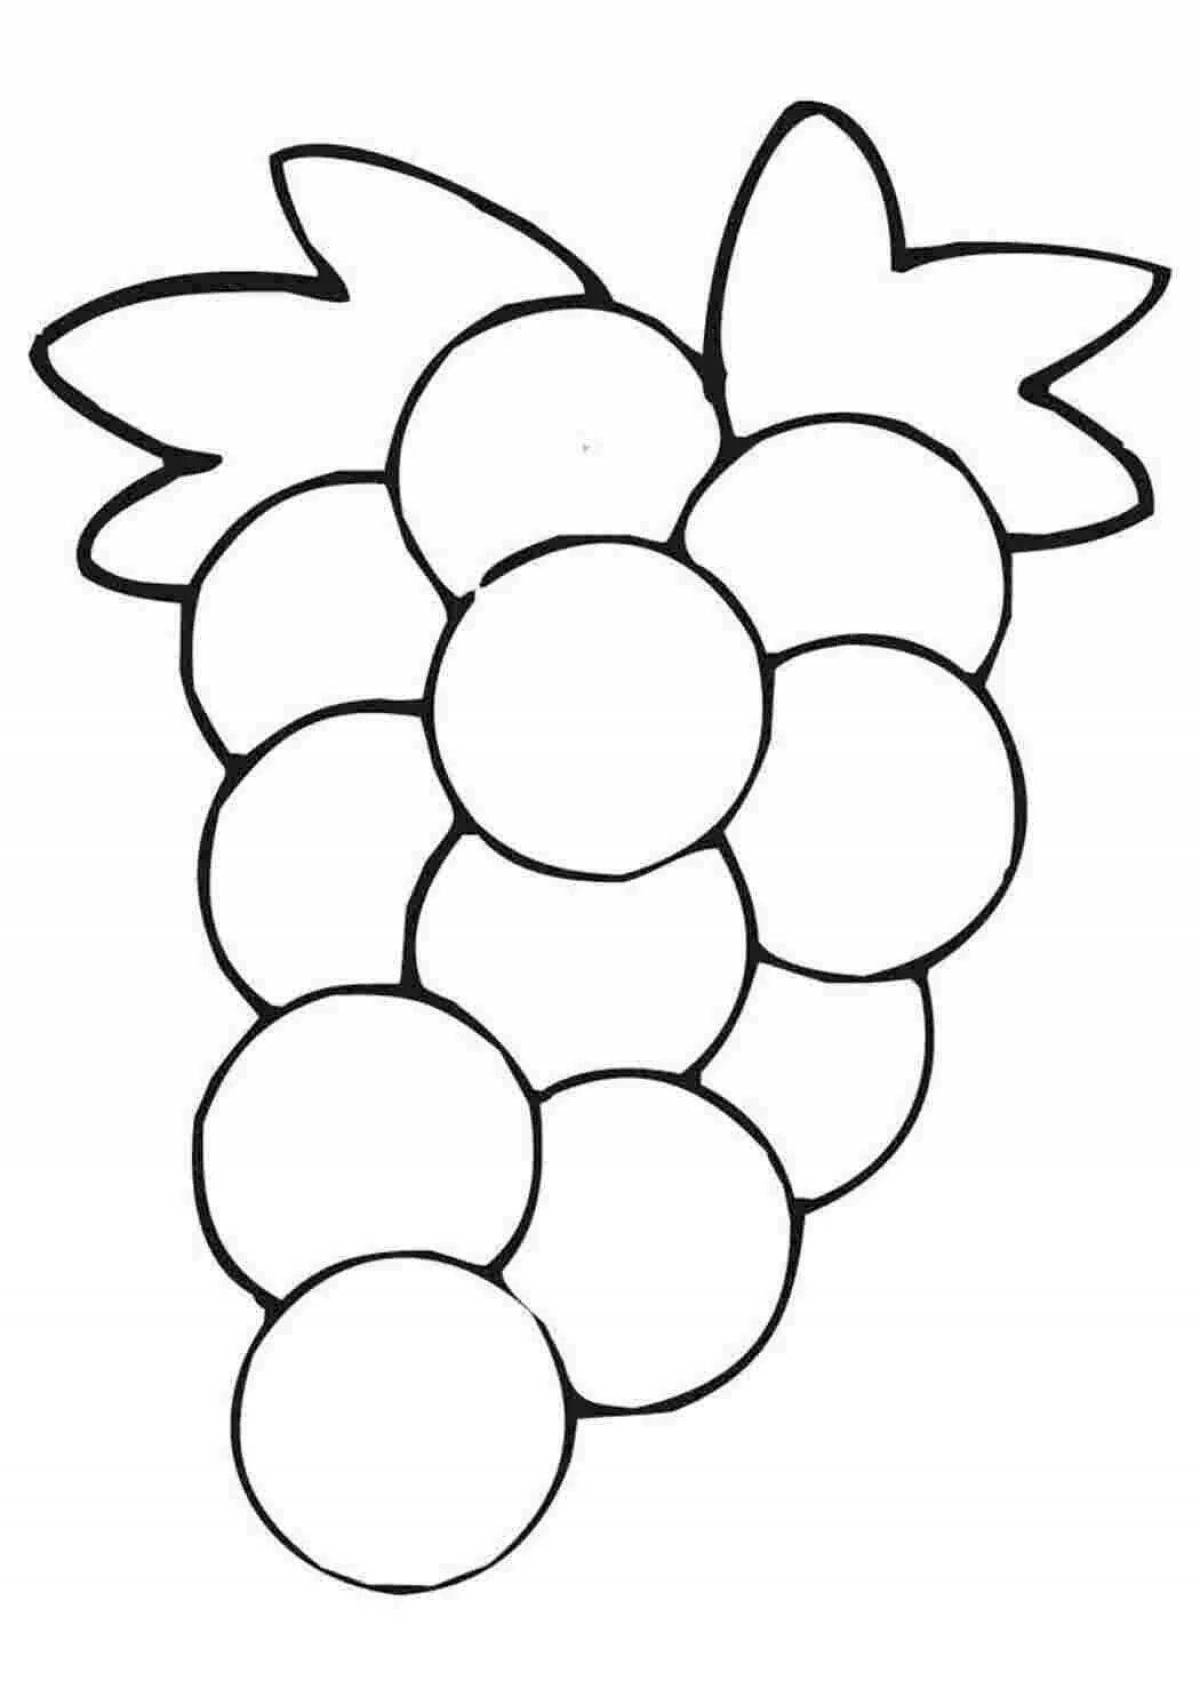 Coloring grapes for the little ones